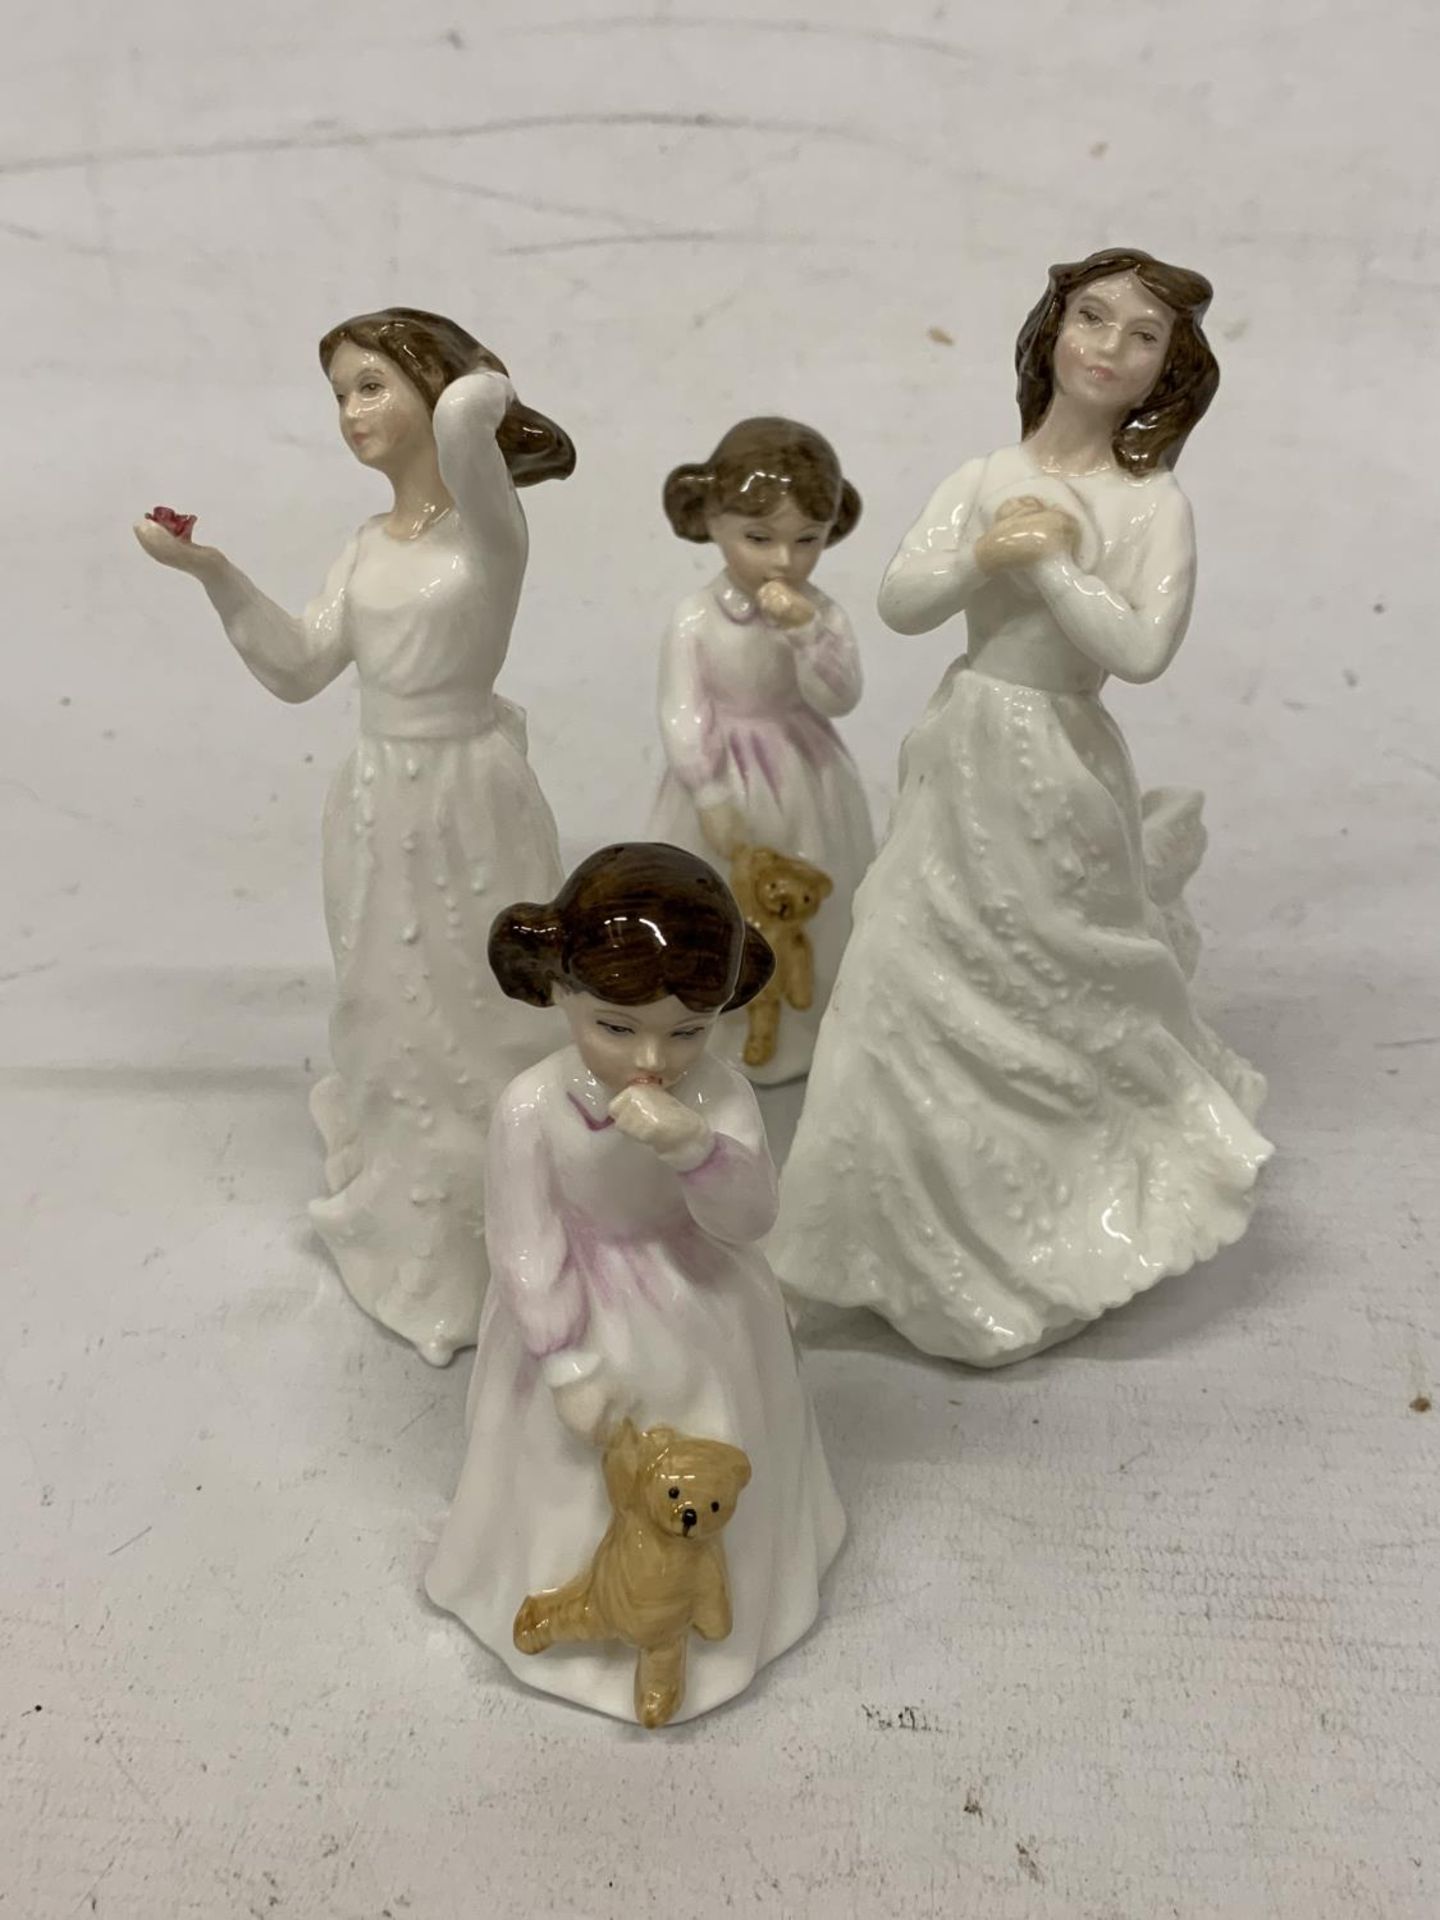 FOUR ROYAL DOULTON FIGURINES "WITH LOVE" AND "FORGET-ME-NOT" AND "DADDY'S GIRL" (2 OF) - Image 2 of 3